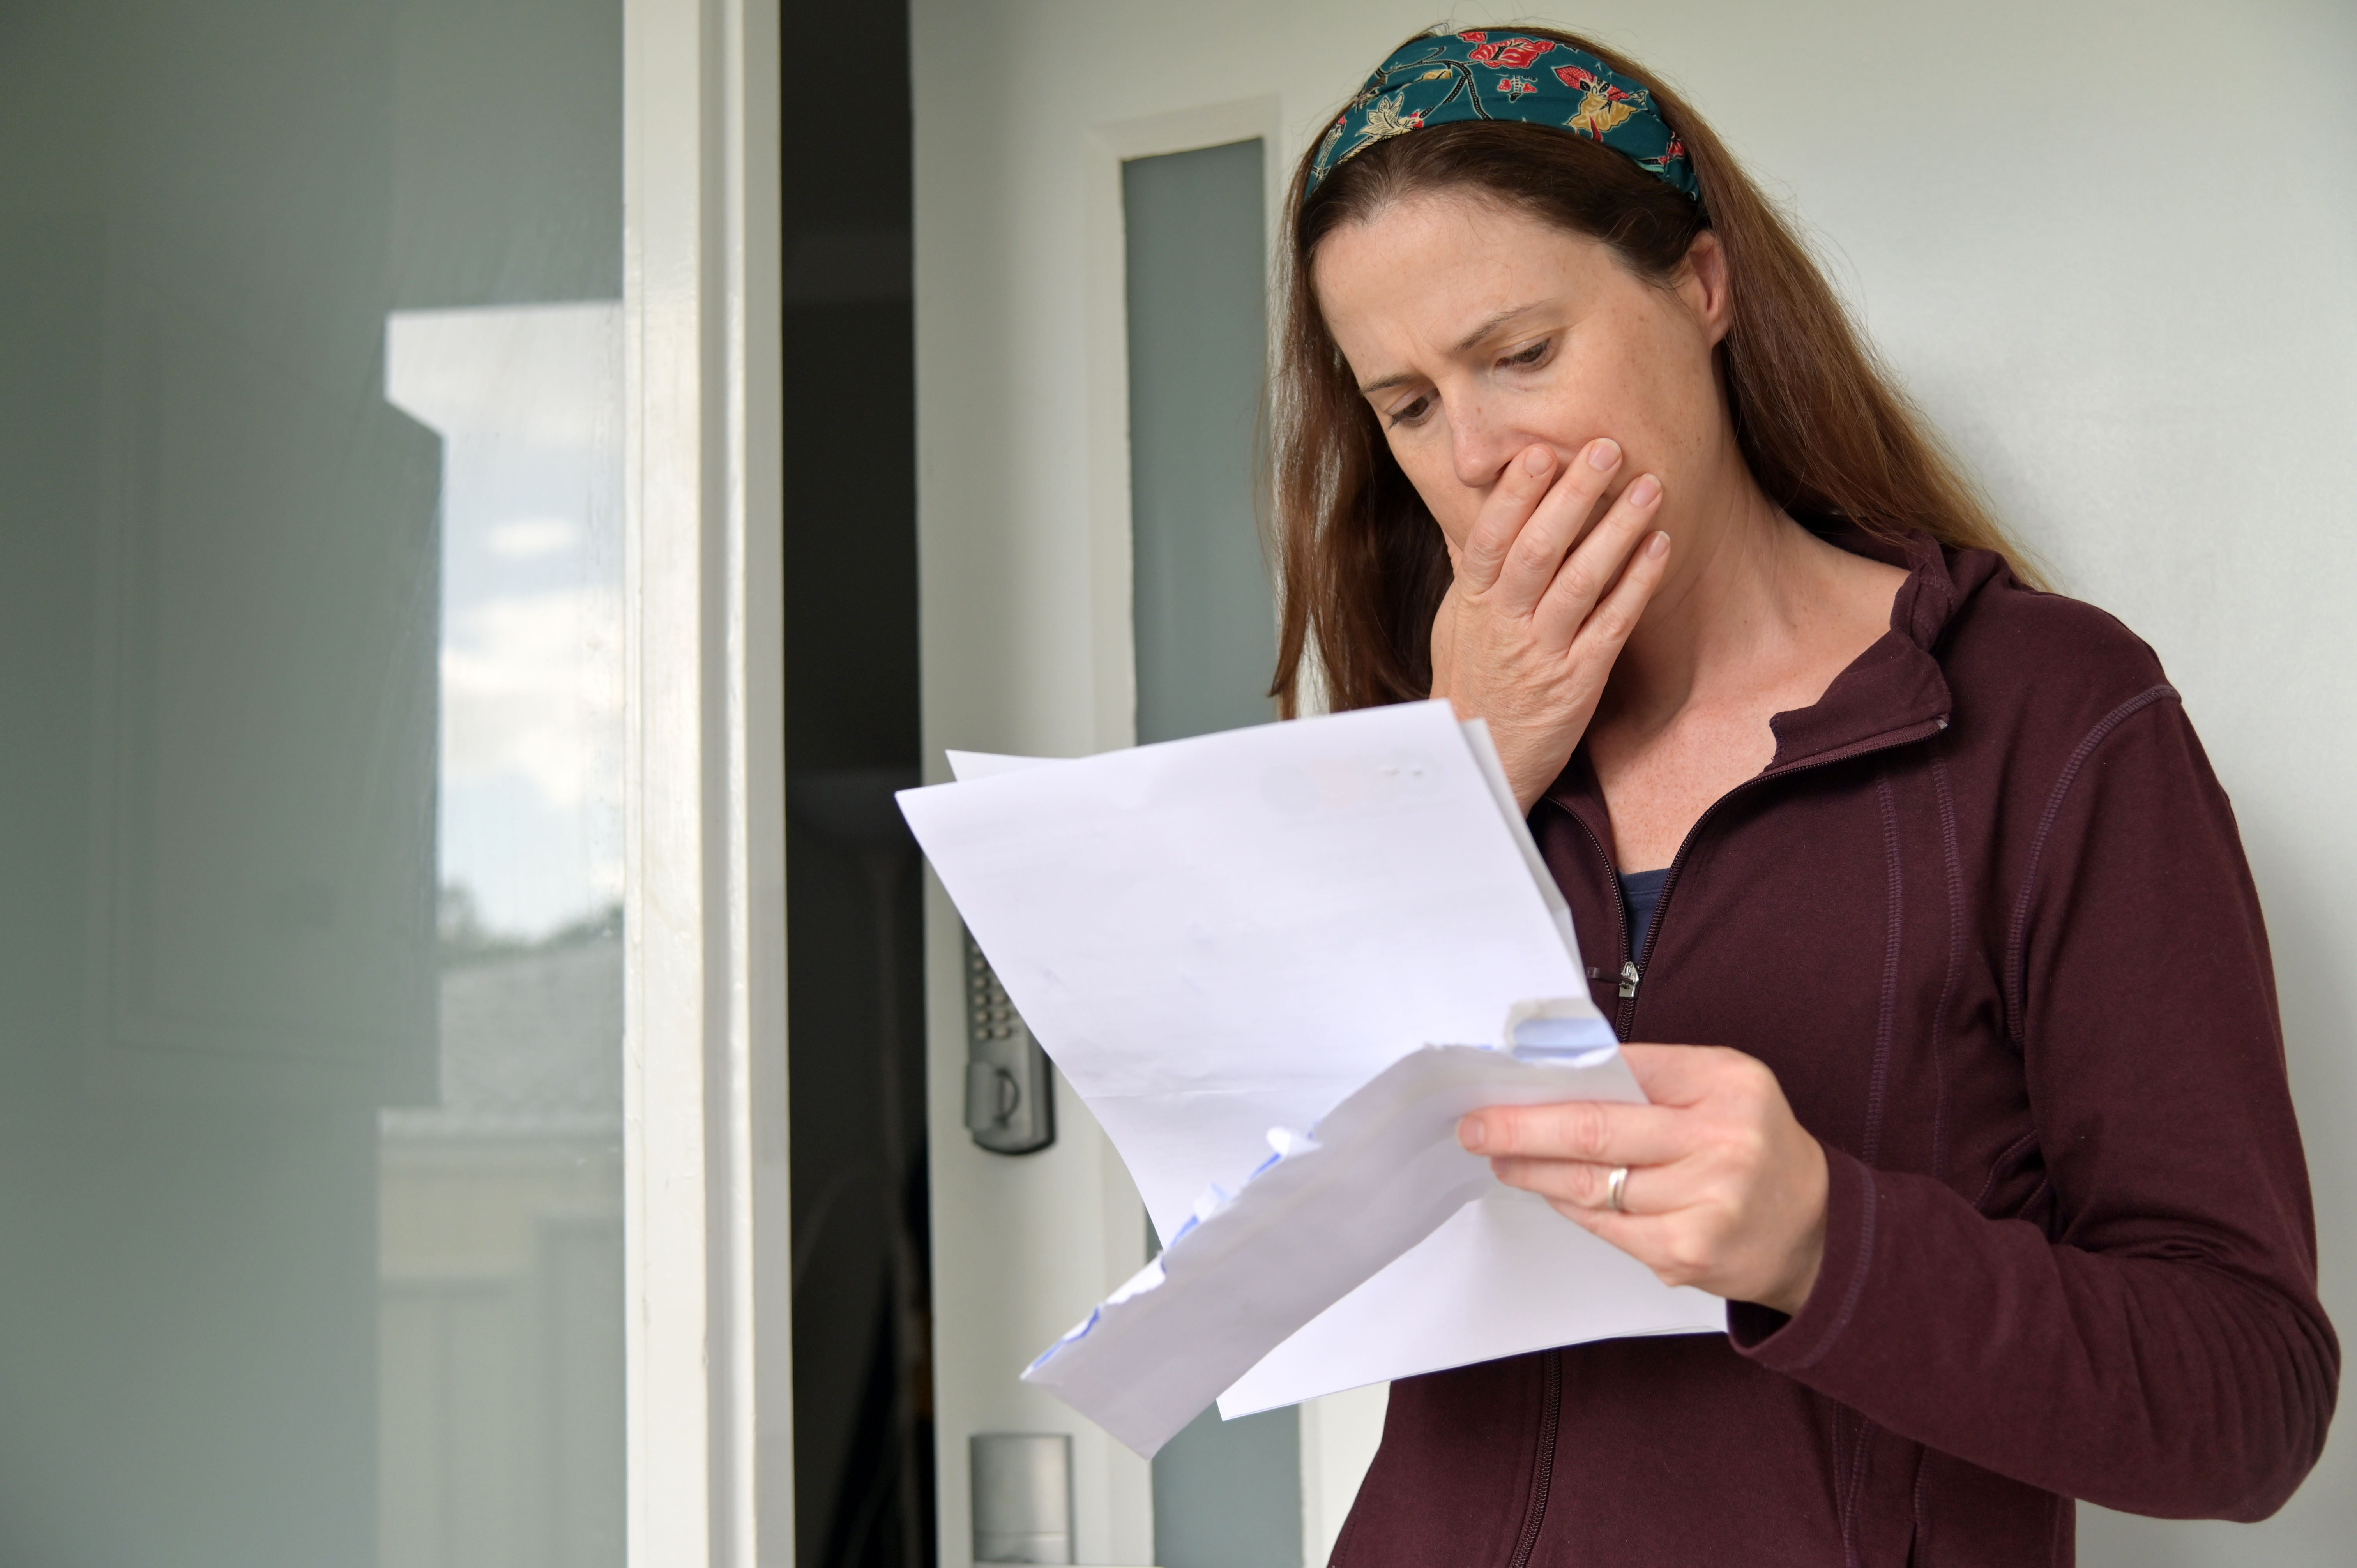 A woman holding documents with one hand on her mouth | Source: Shutterstock